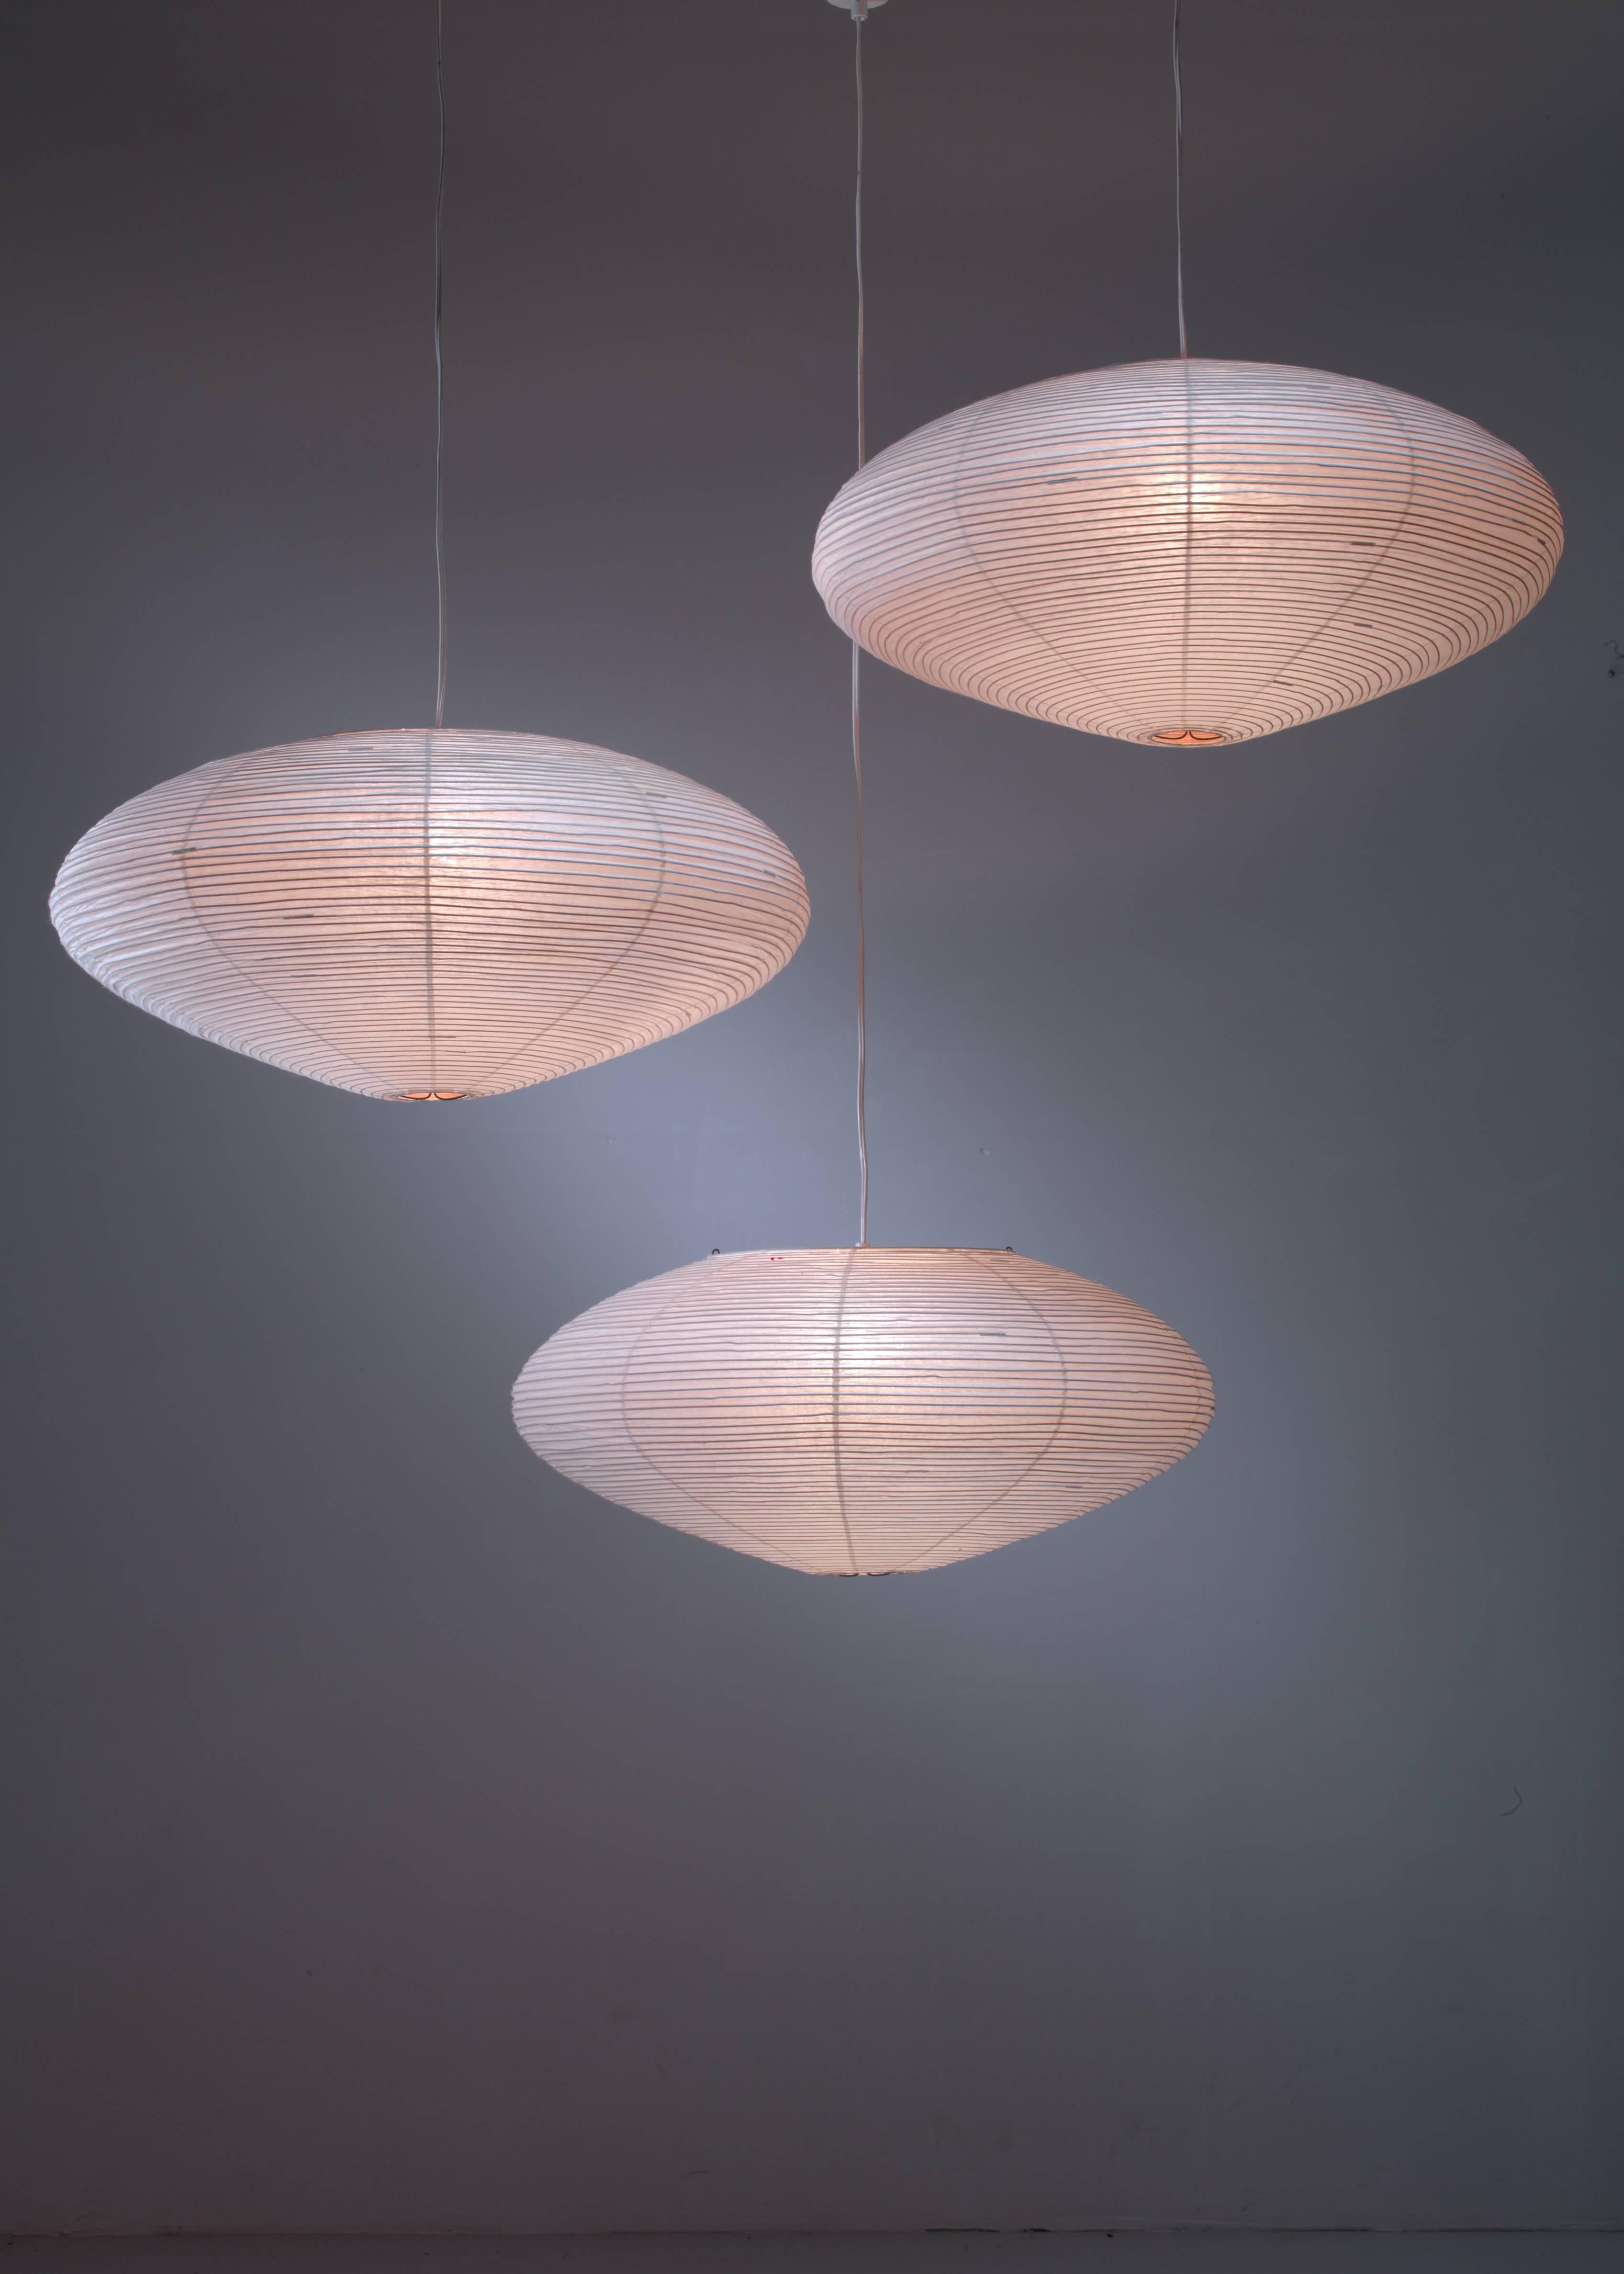 A set of three early handmade Isamu Noguchi A21 paper pendants for Akari, branded with the original logo. The lanterns are a beautiful combination of Japanese handcraft with modernism.

All three in perfect condition and stamped. Dimensions are of